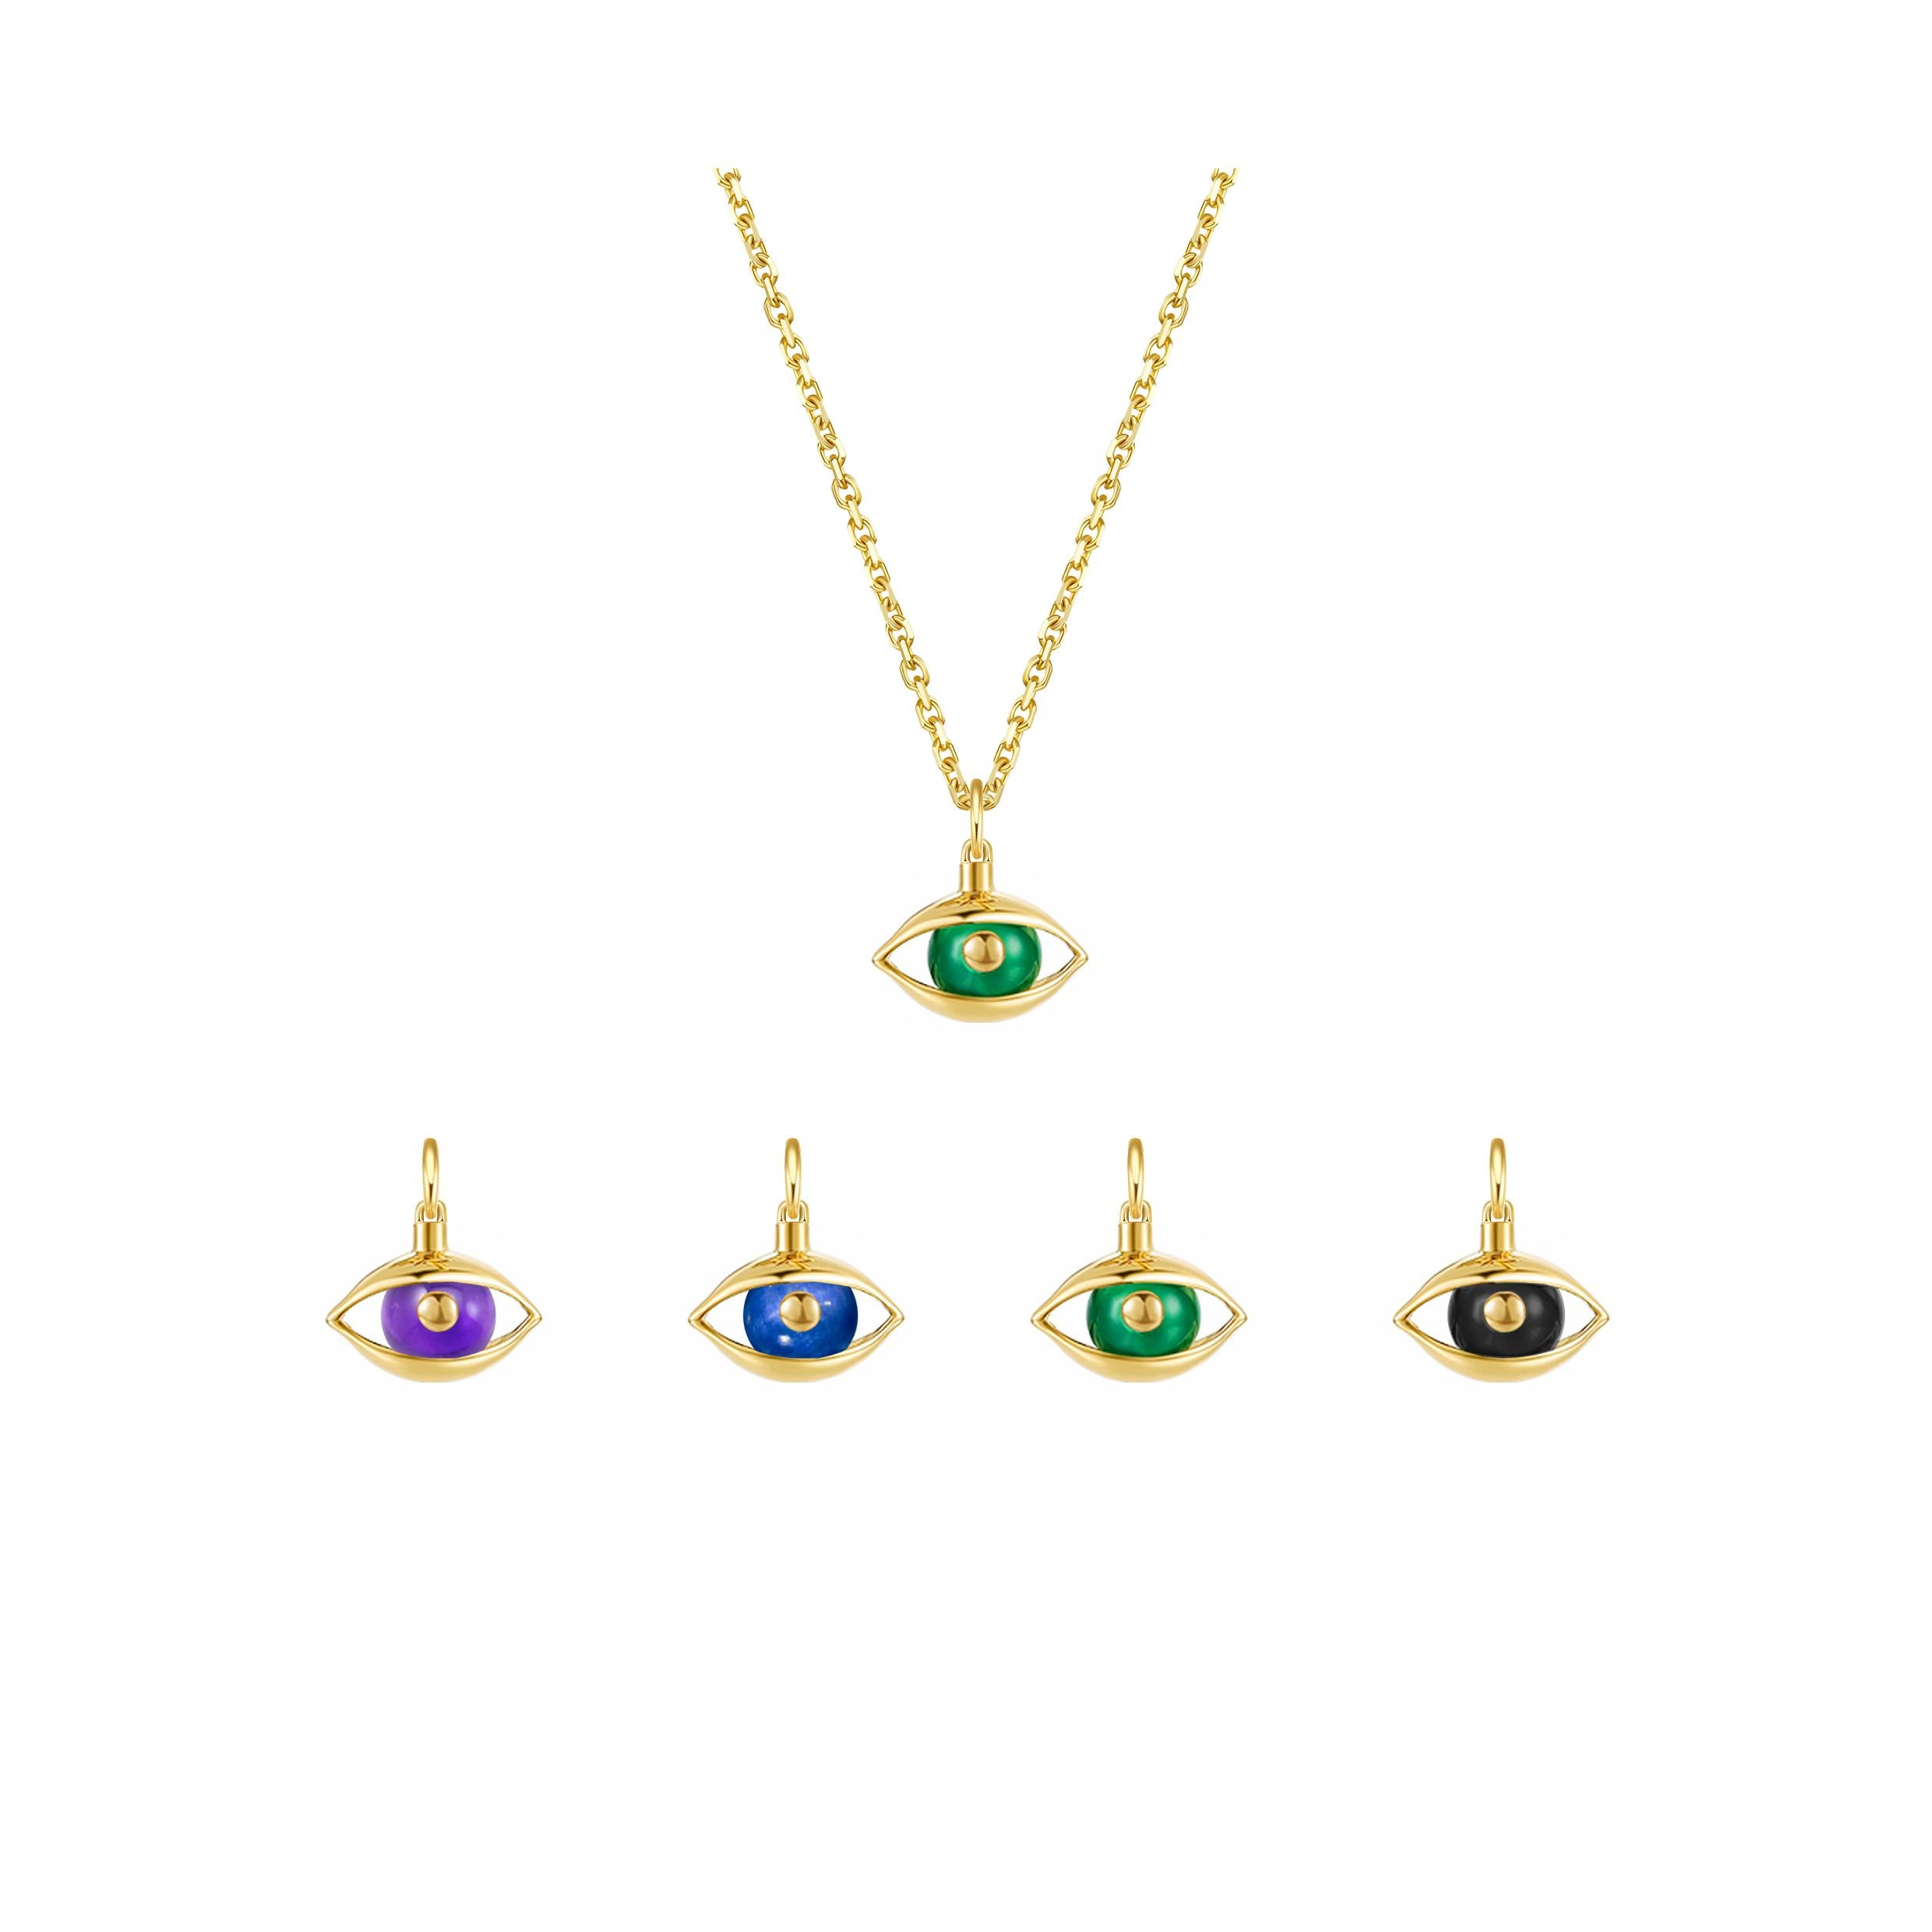 This very unique mini eye pendant necklace from The Eye collection, it's a perfect everyday talisman, elegant and stylish.  The Eye collection, showcases this award winning, fine jewellery designer’s extraordinary talent to work with shapes,